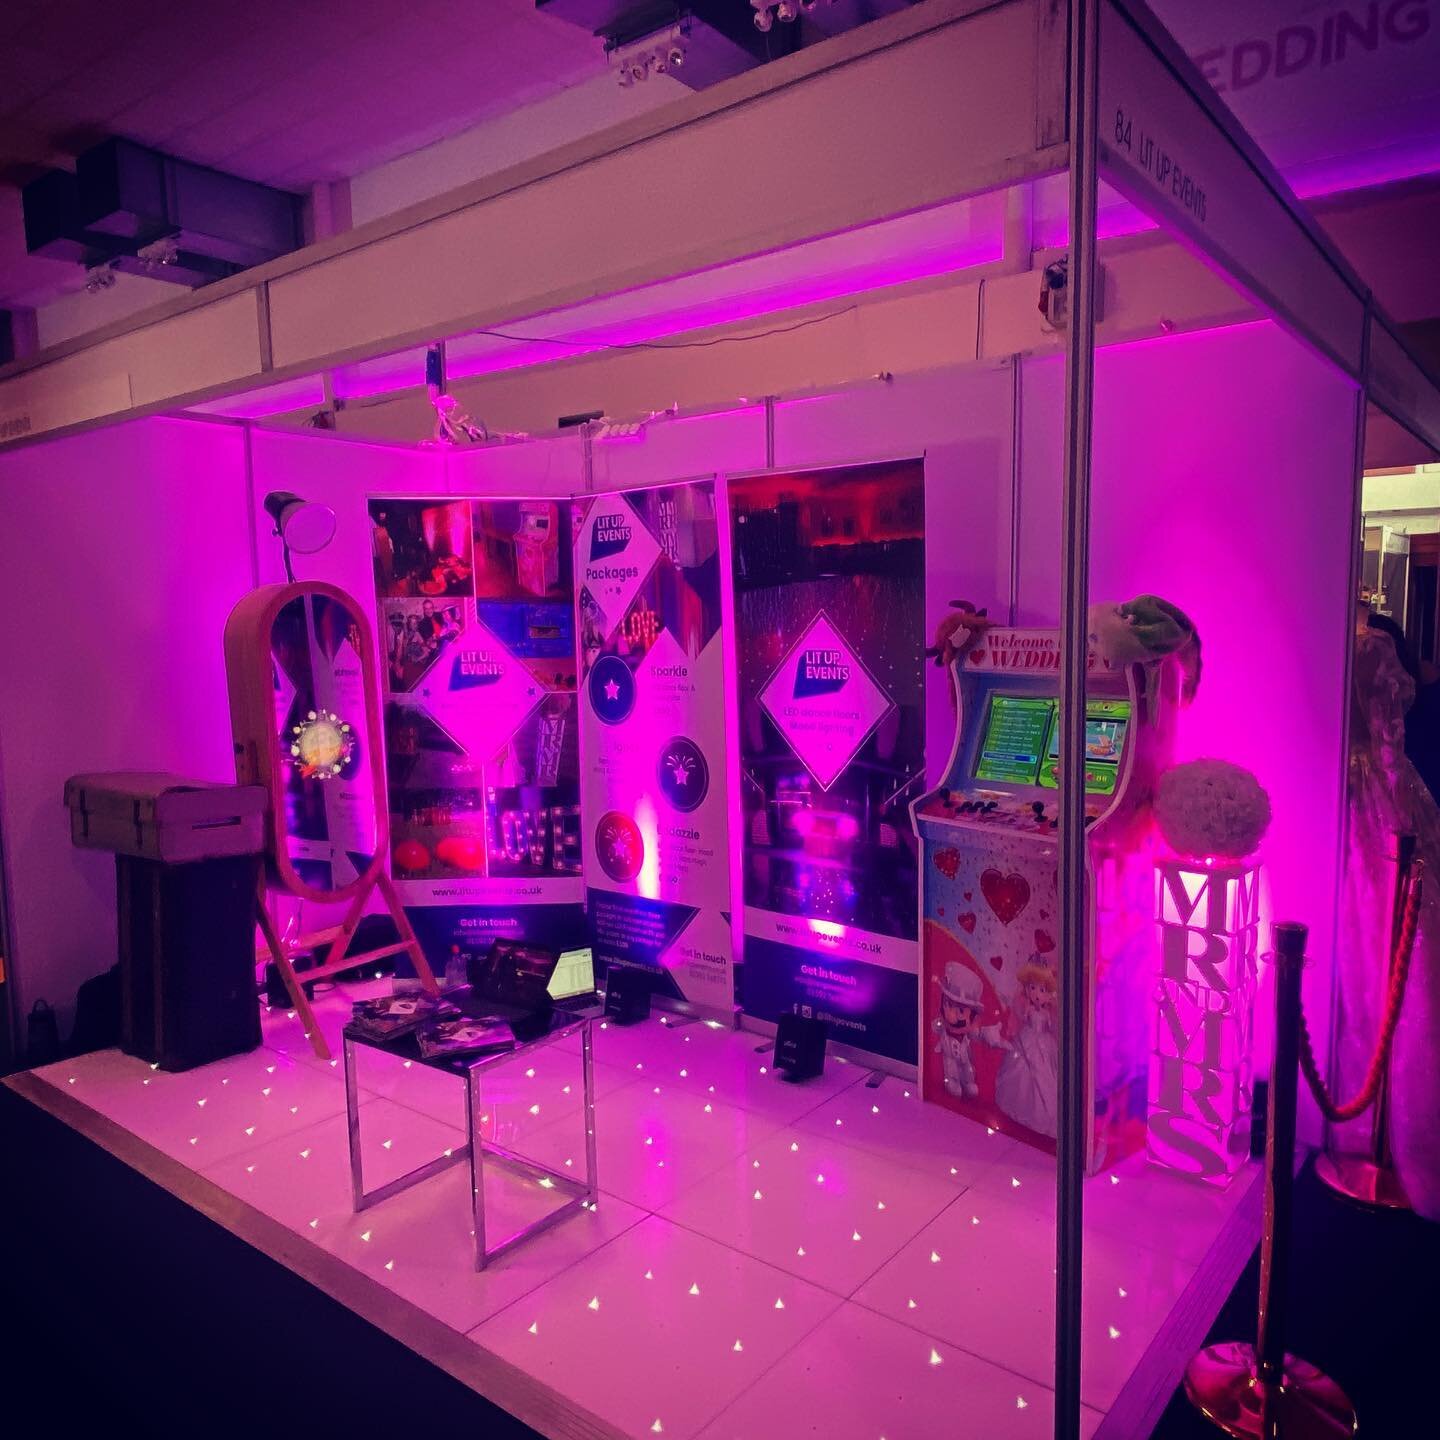 Ready for a great weekend of Wedding chat. Catch us on stand 84 @ed_weddingfair